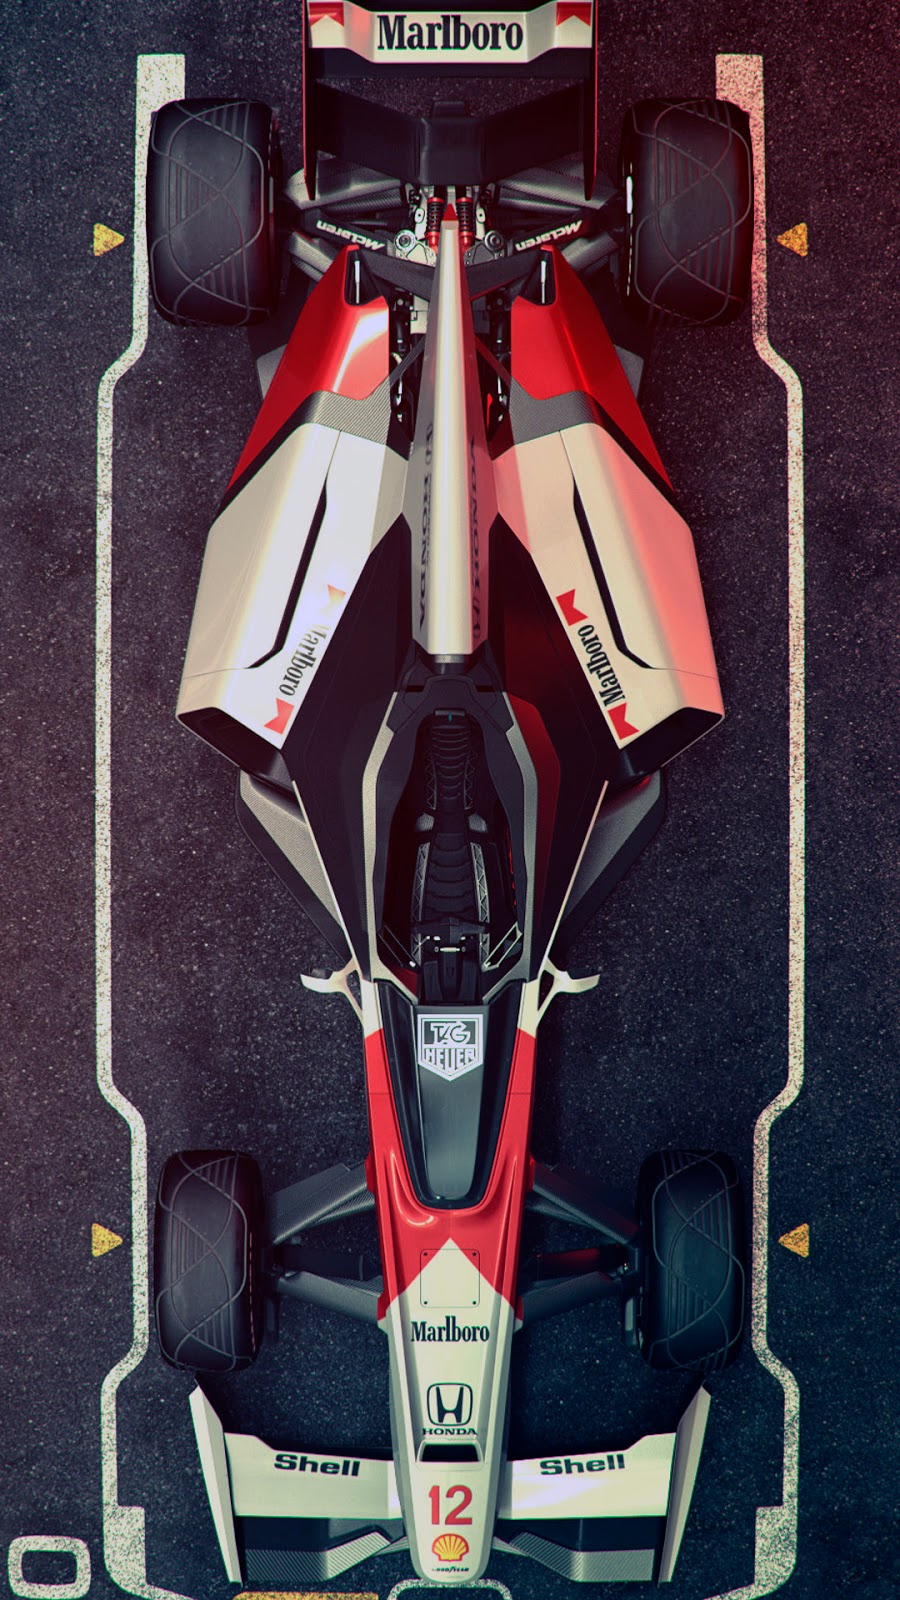 Racing background wallpaper for phone